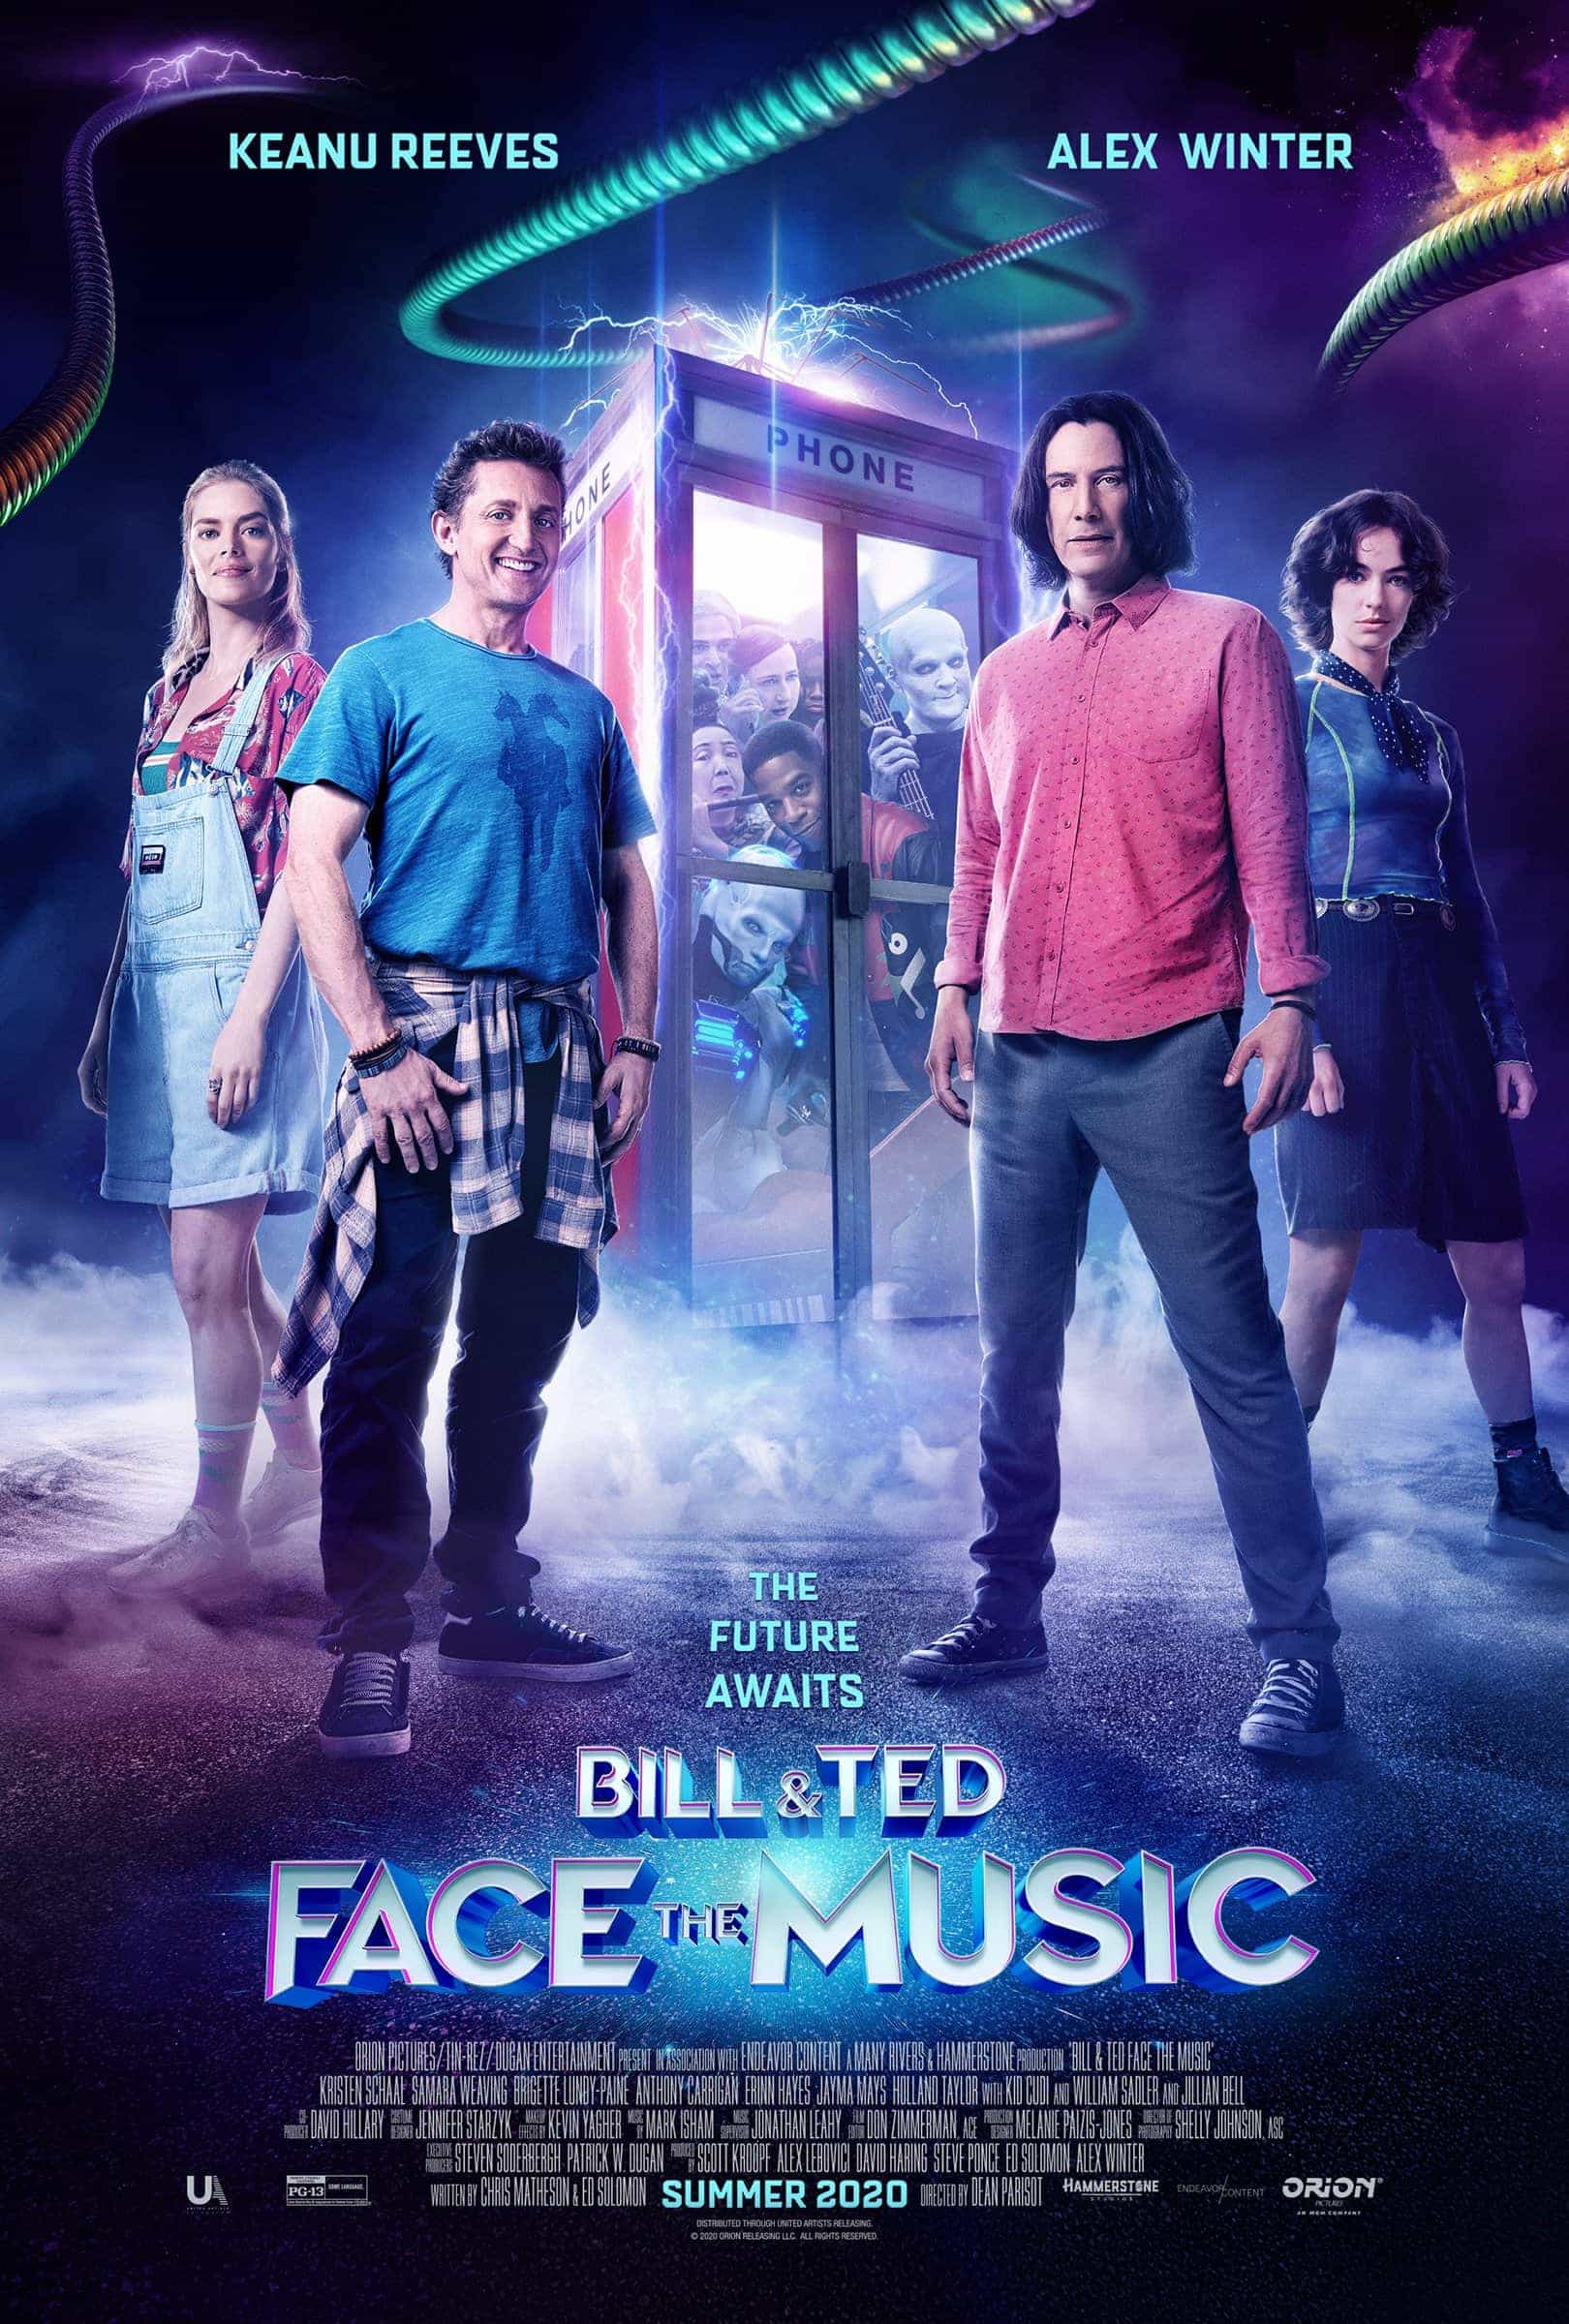 New poster release for Bill & Ted Face The Music starring Keanu Reeves - movie release date 21st August 2020